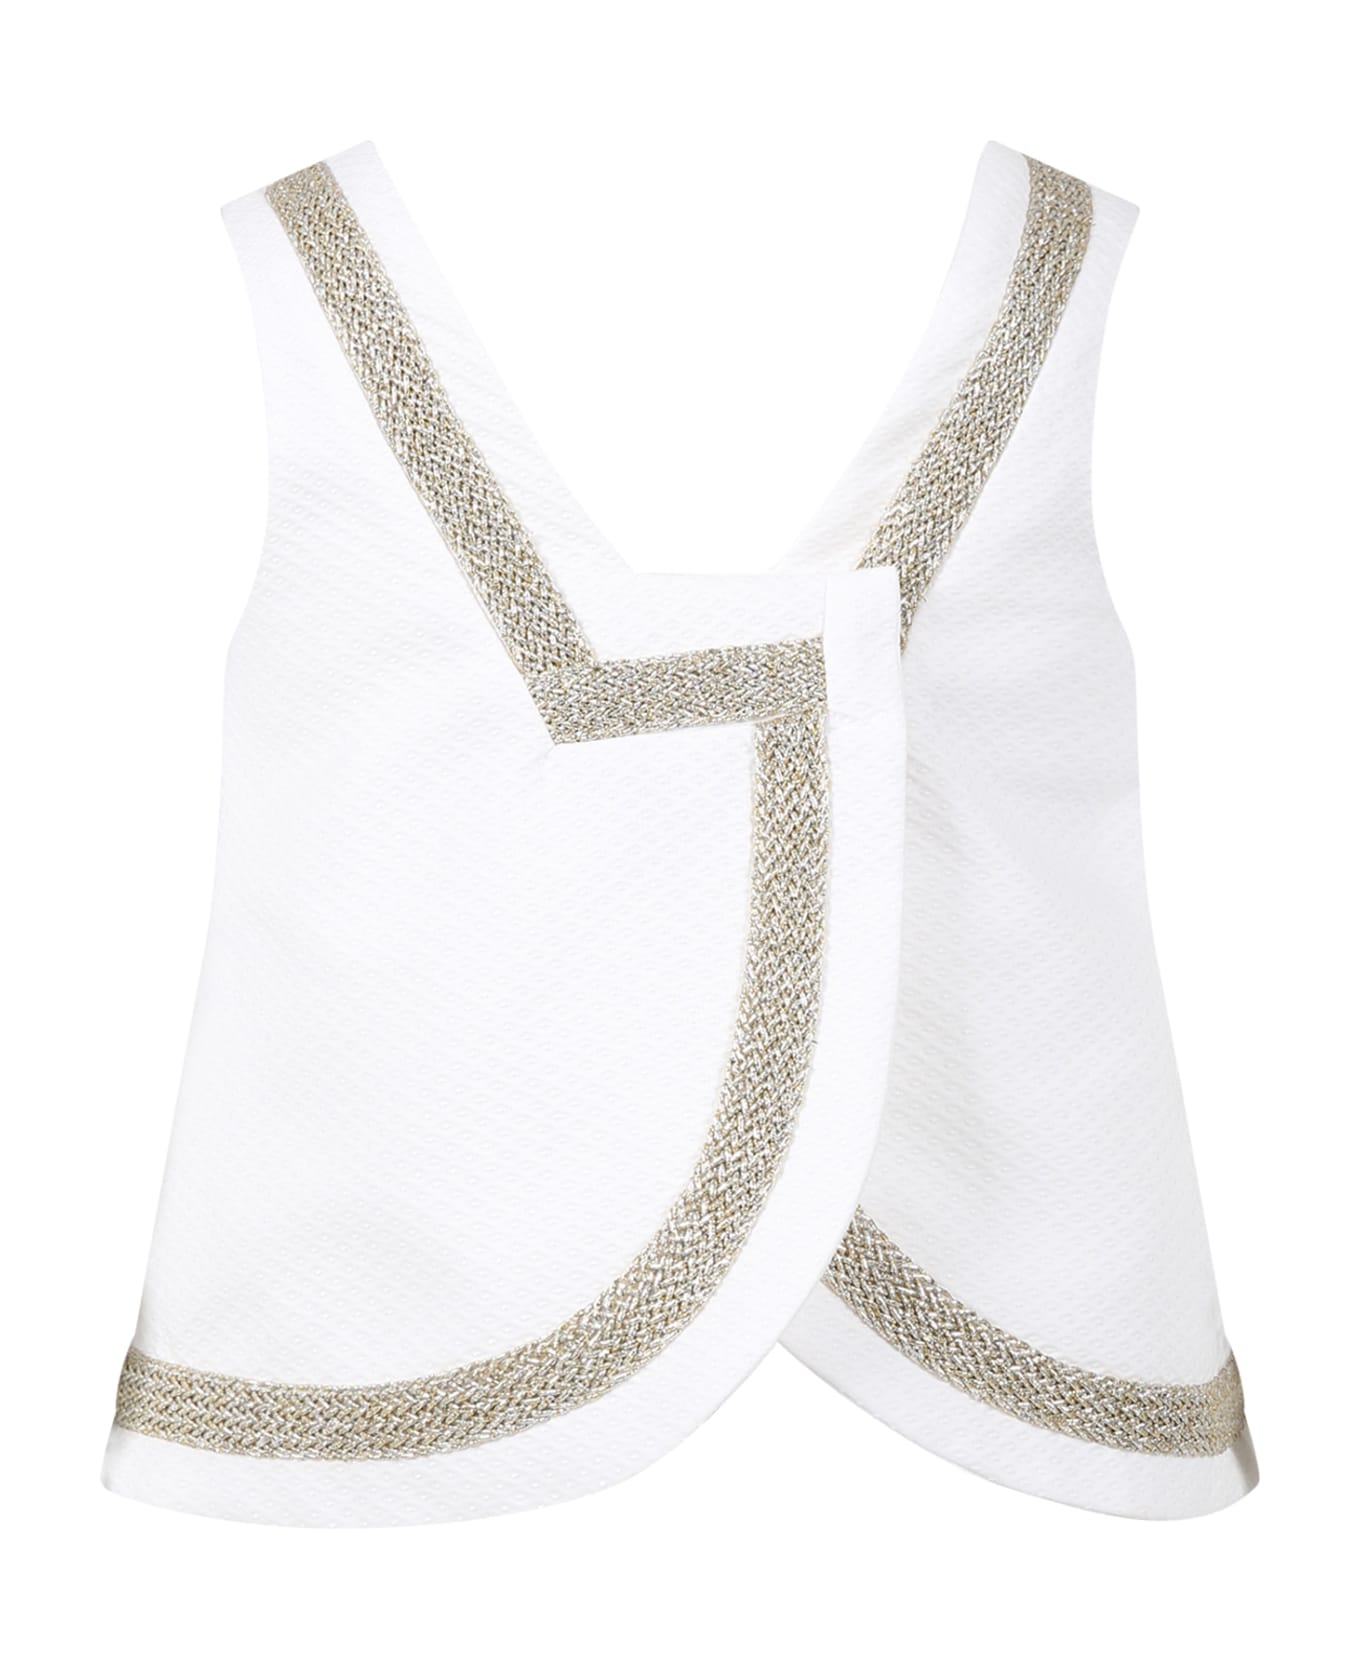 Genny White Top For Girl With Lurex Detail - White